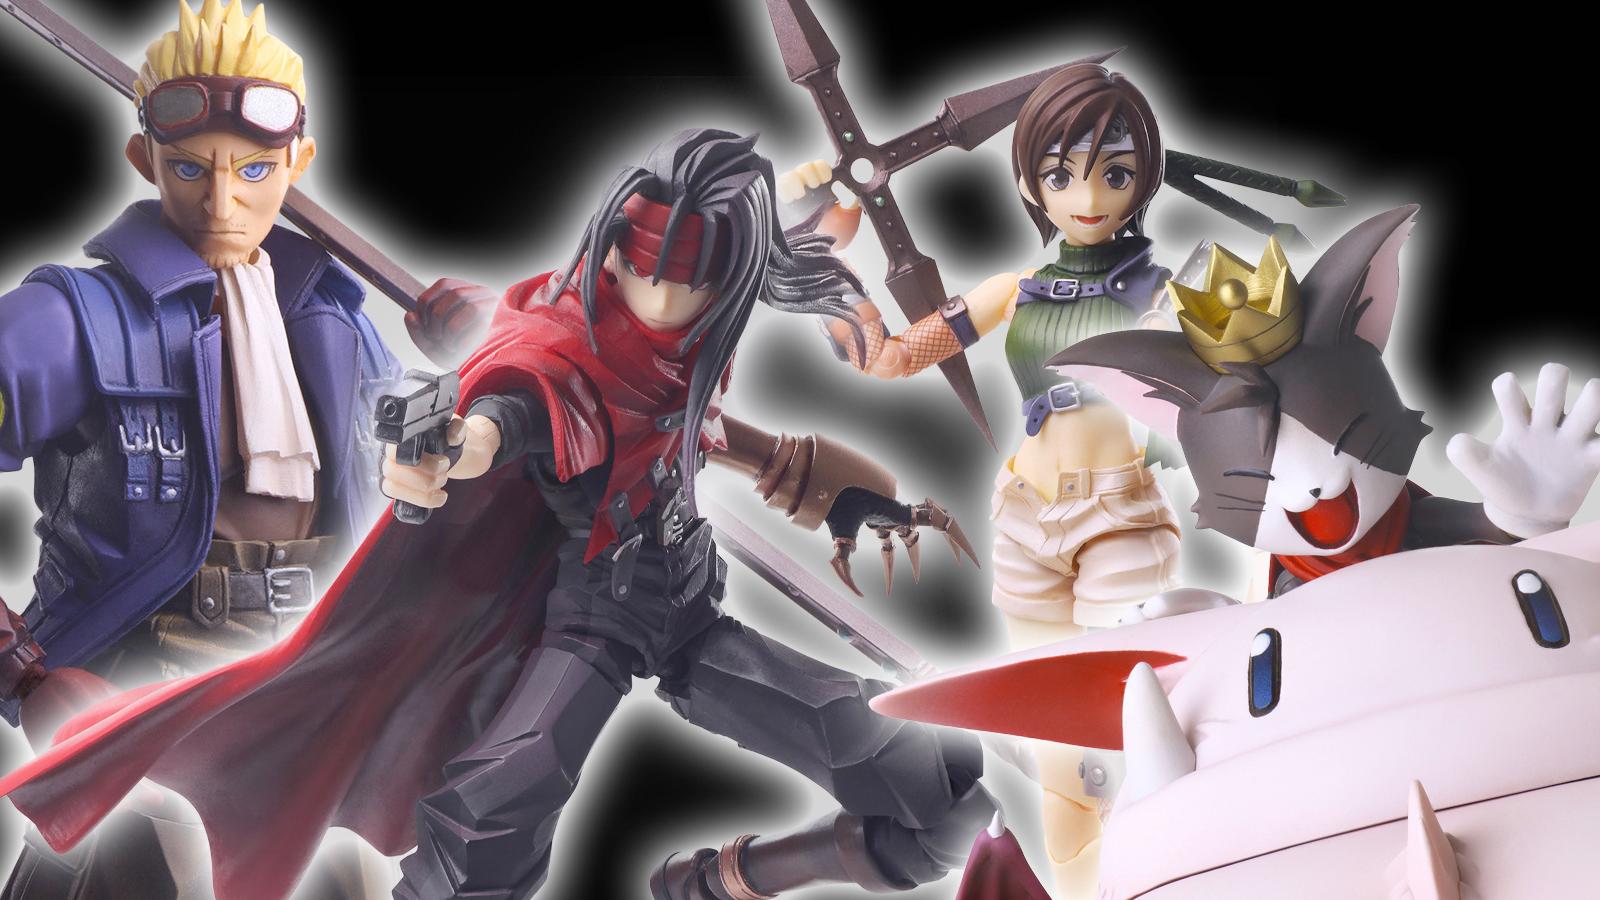 final fantasy 7 figures of characters from left to right: cid, vincent, yuffie, cait sith